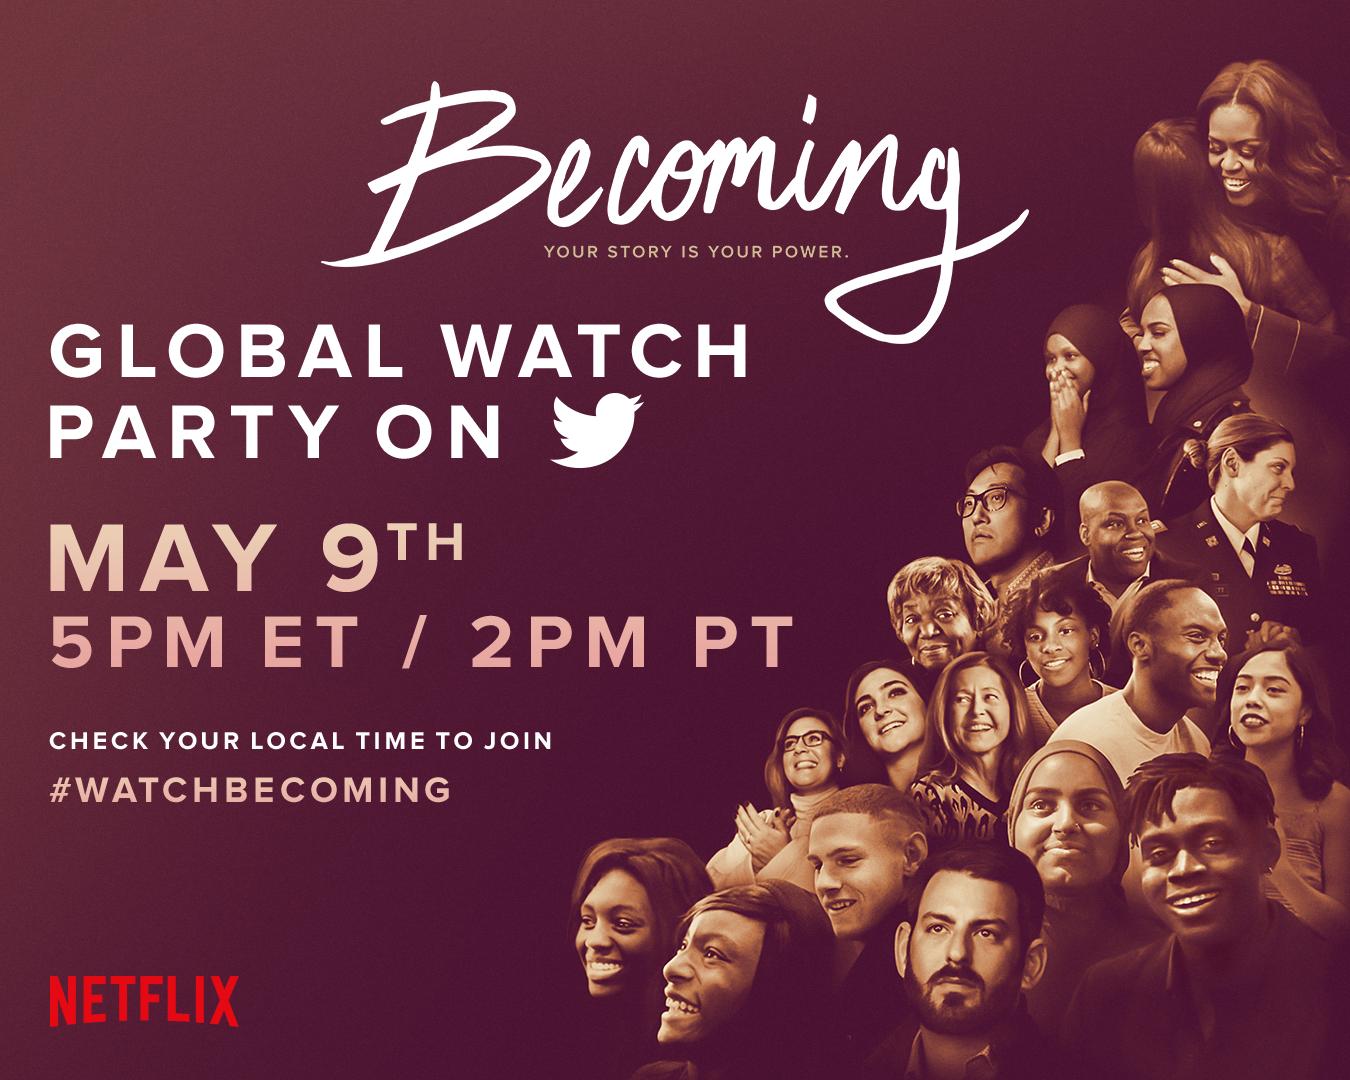 Join the Global Watch Party for  the Netflix Original Documentary “Becoming”